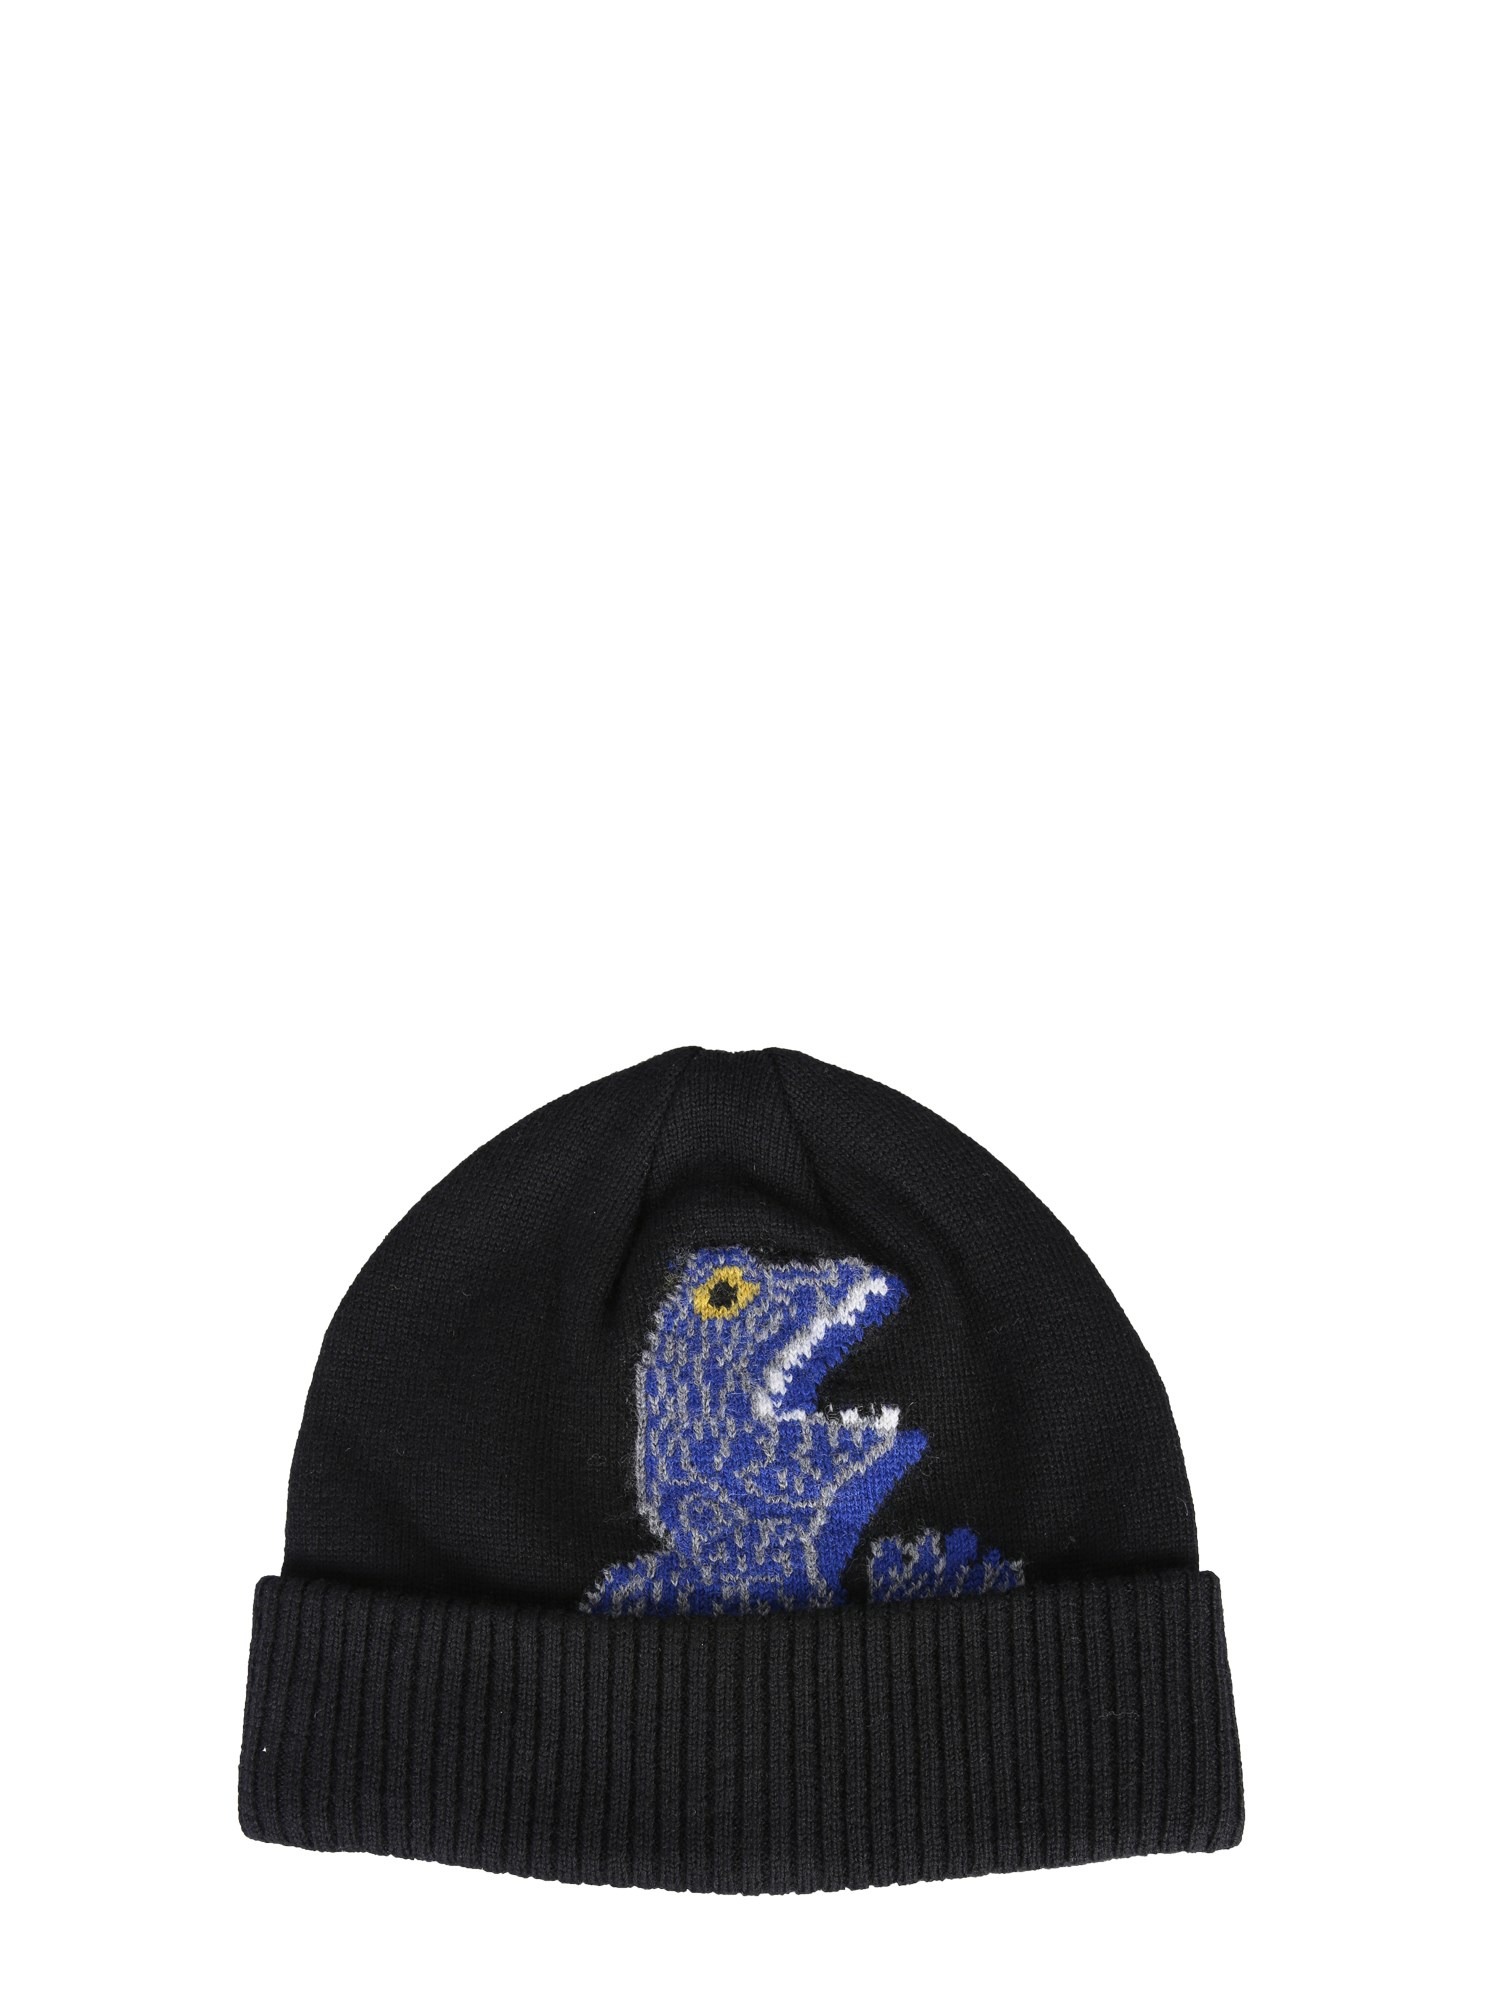 PS BY PAUL SMITH BEANIE HAT,190943